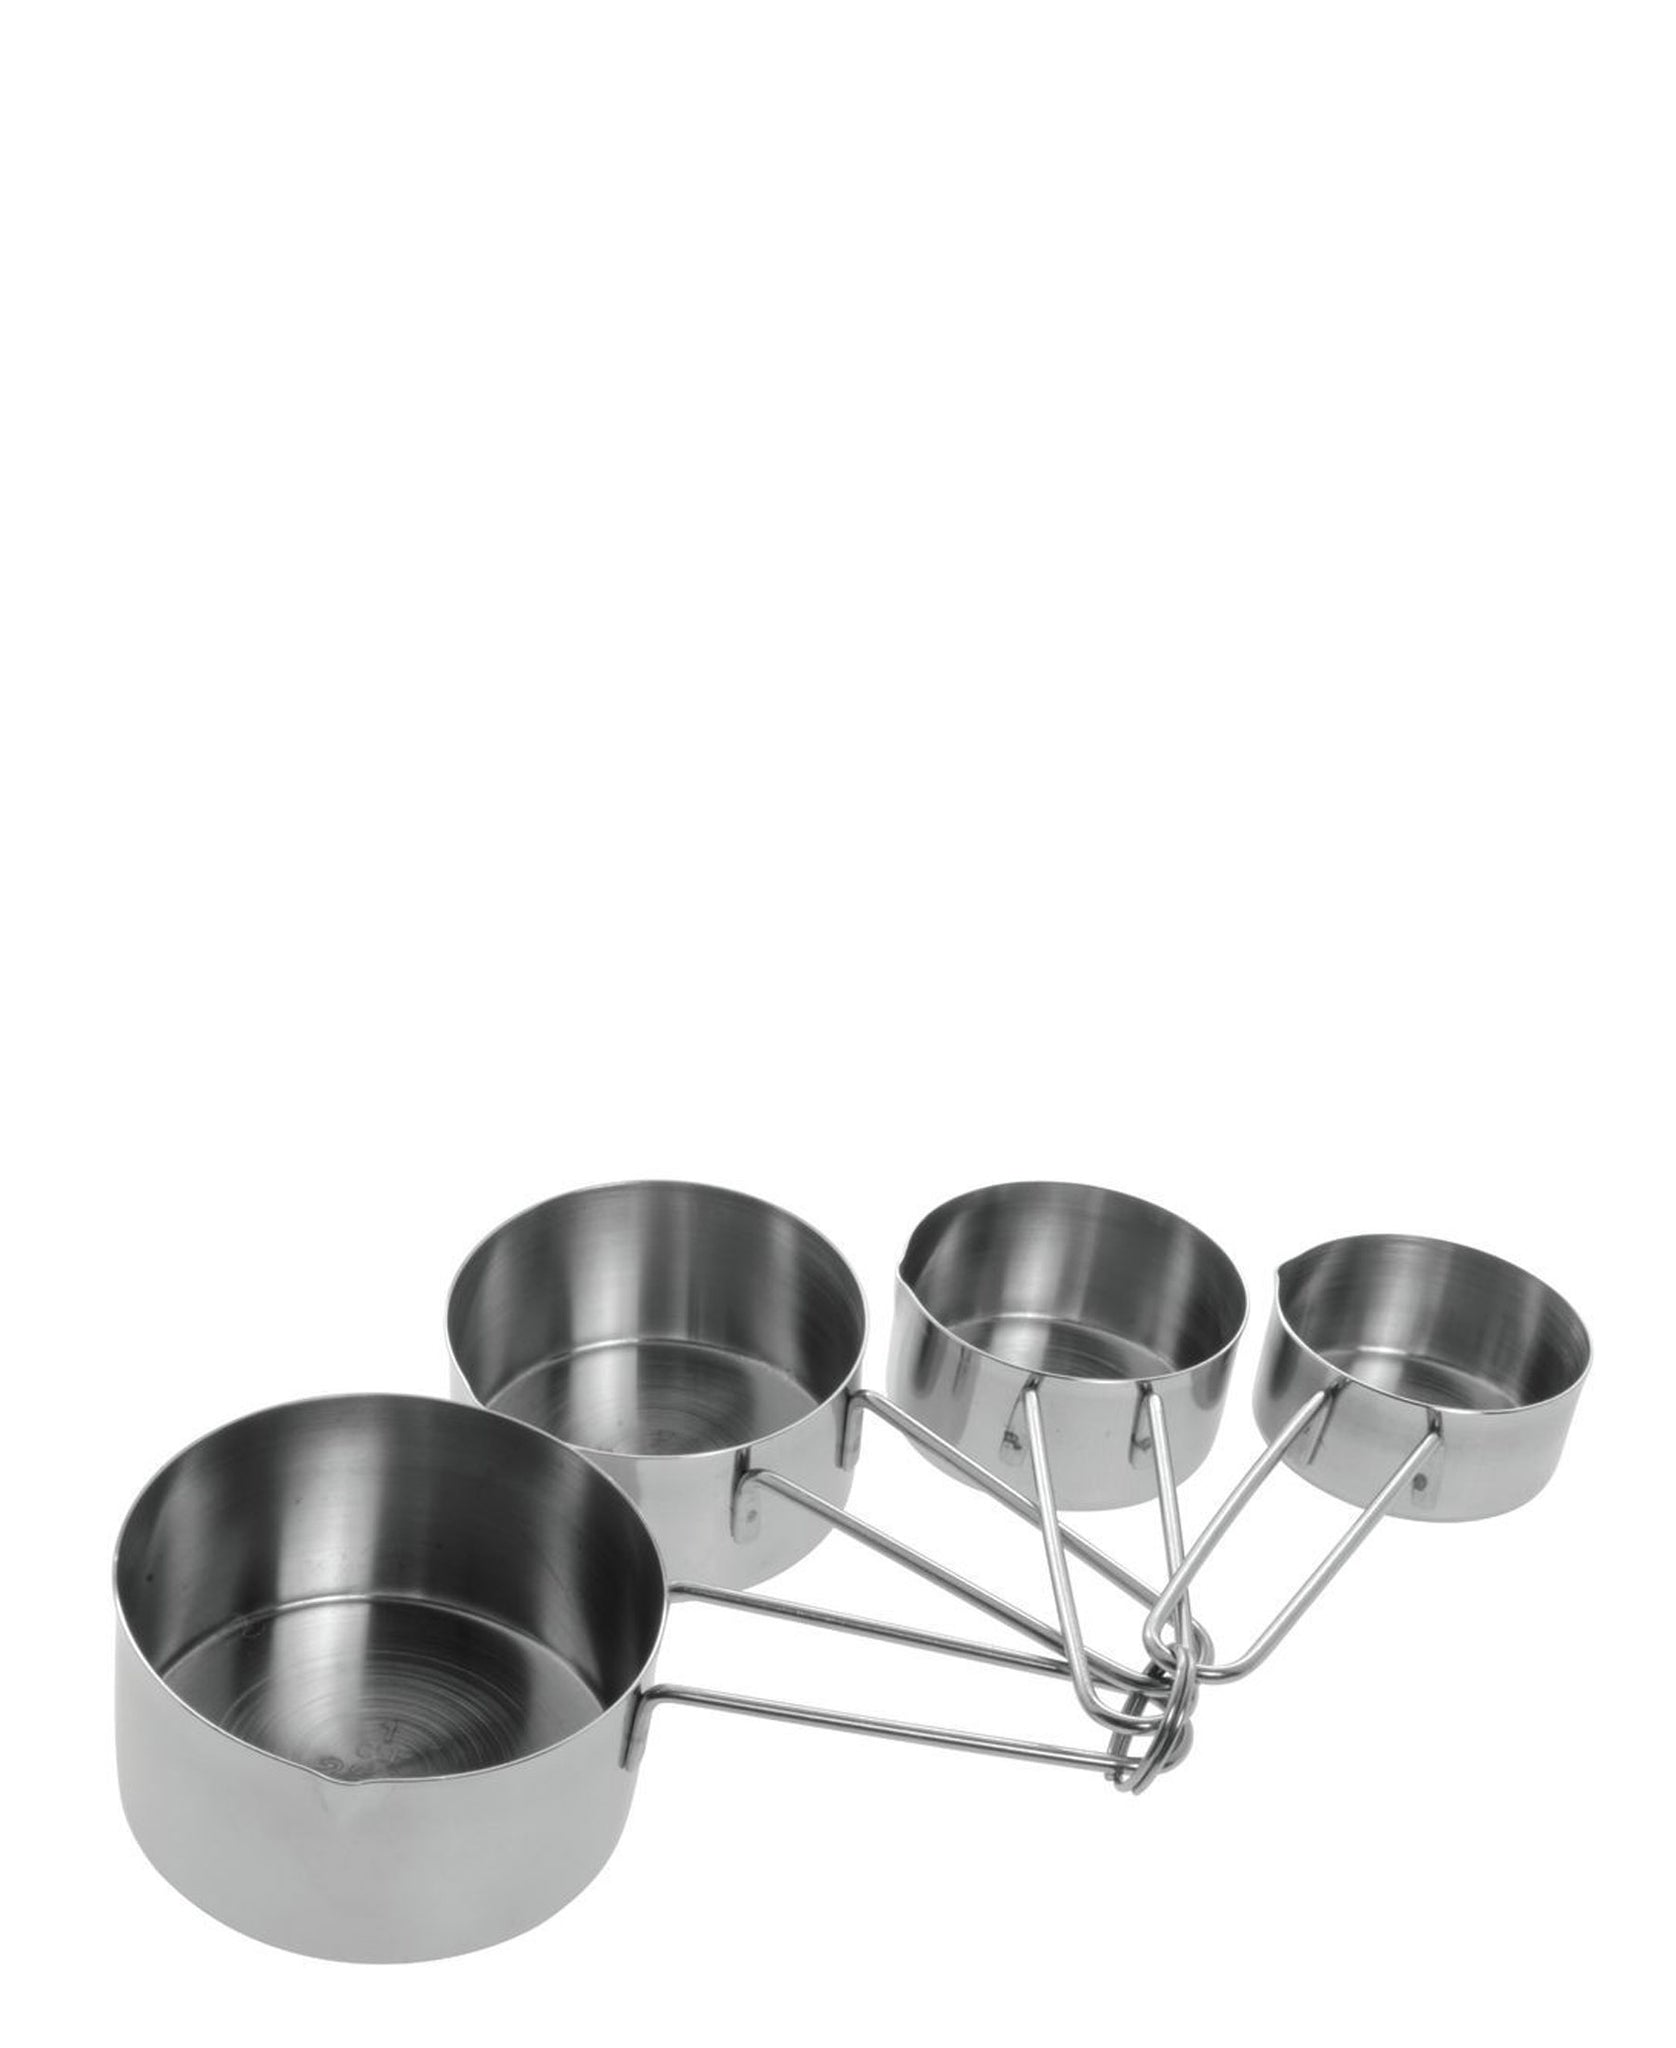 Kitchen Life Stainless Steel 4 Piece Measuring Cups - Silver